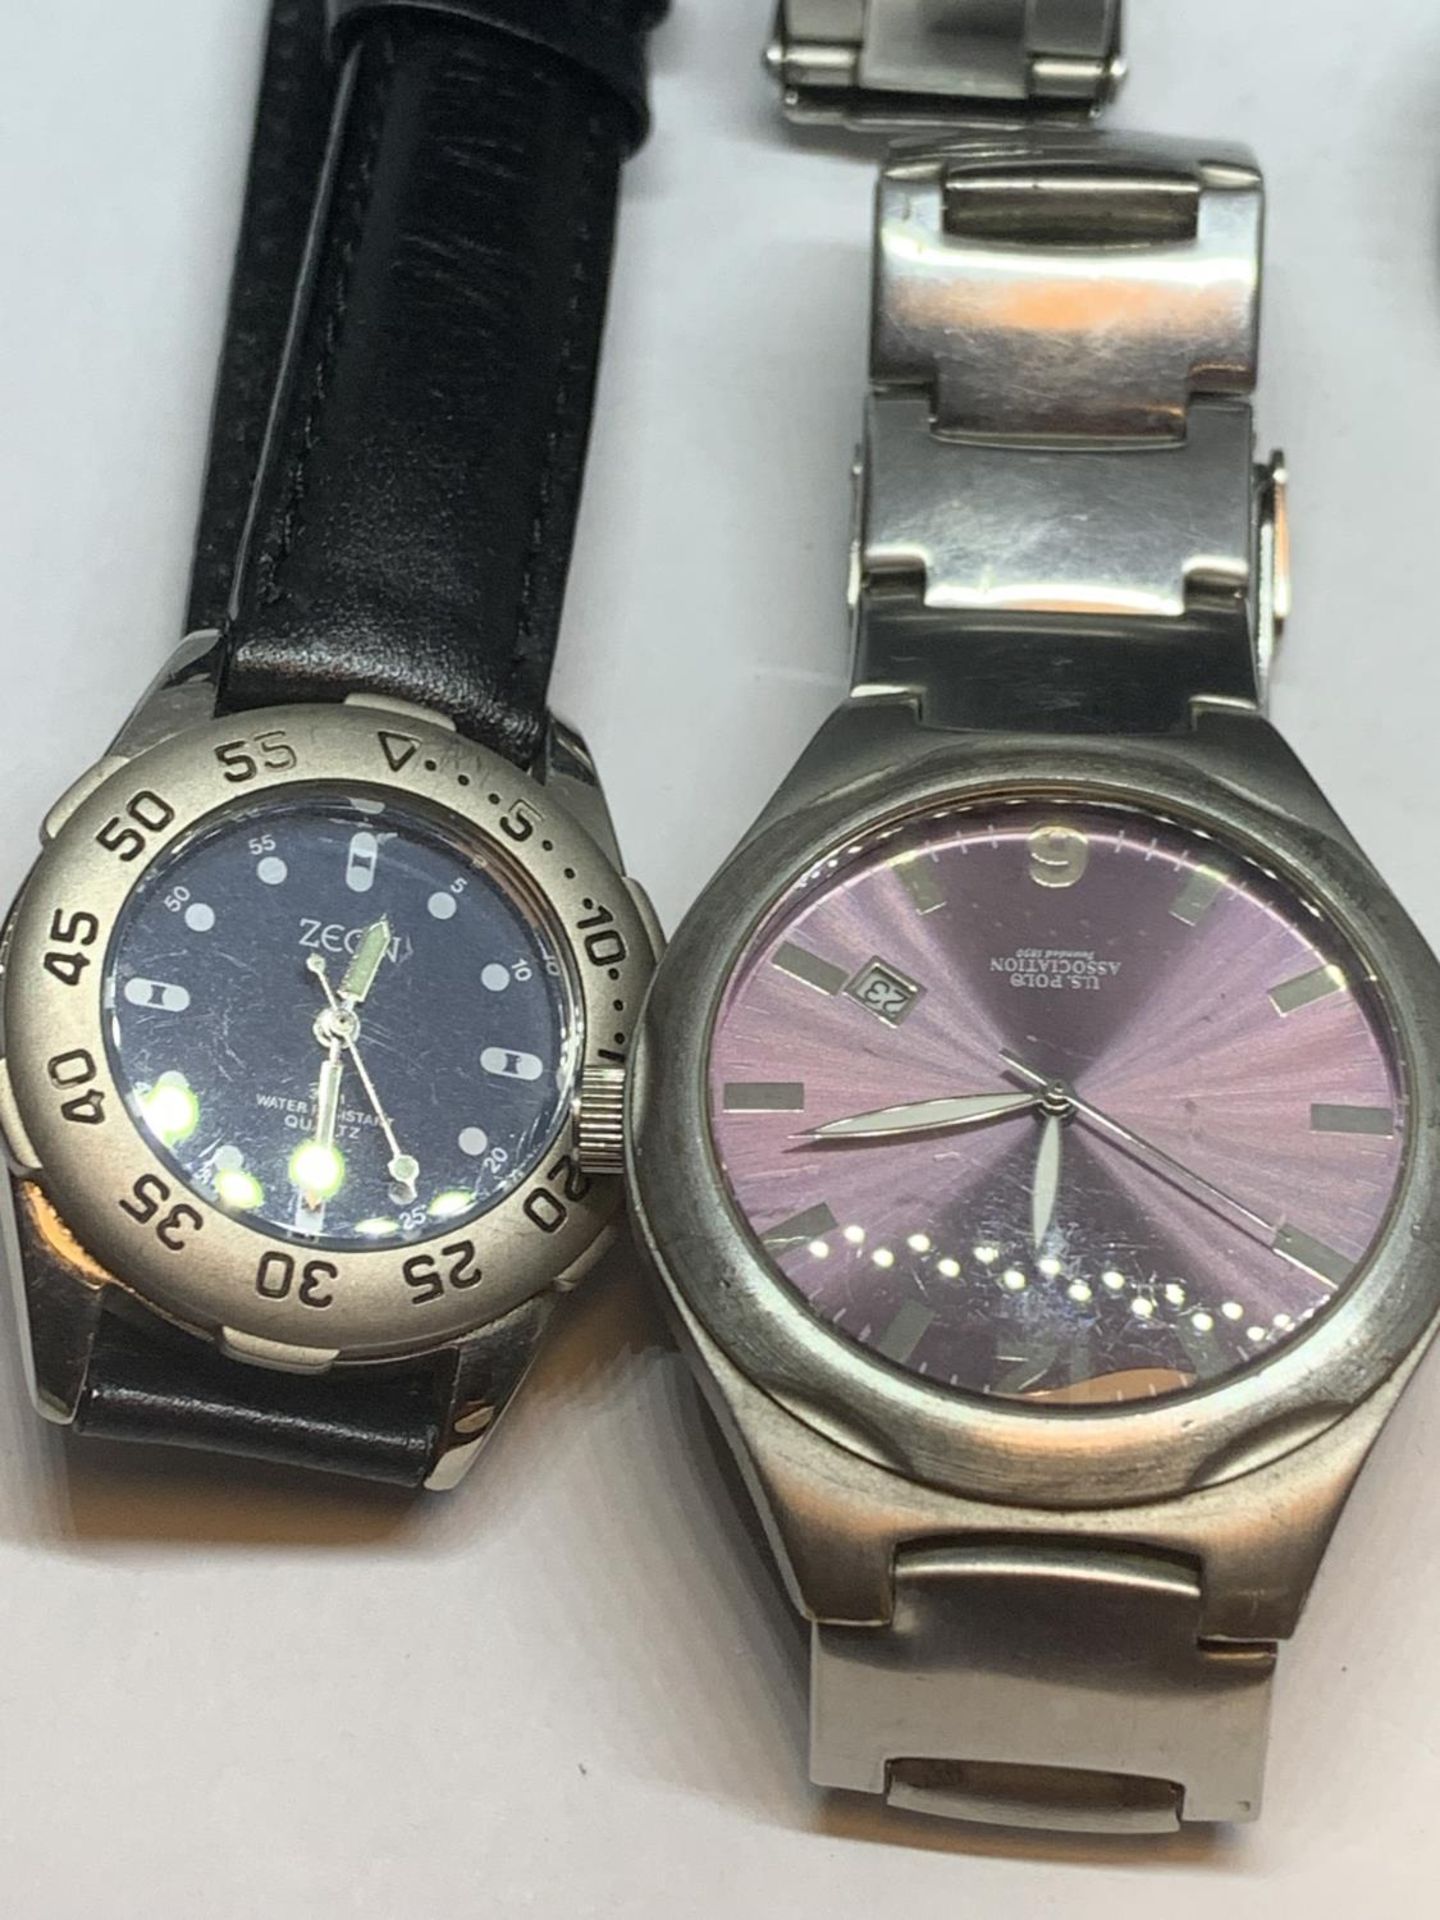 FIVE VARIOUS WRIST WATCHES ALL SEEN WORKING BUT NO WARRANTY - Image 2 of 4